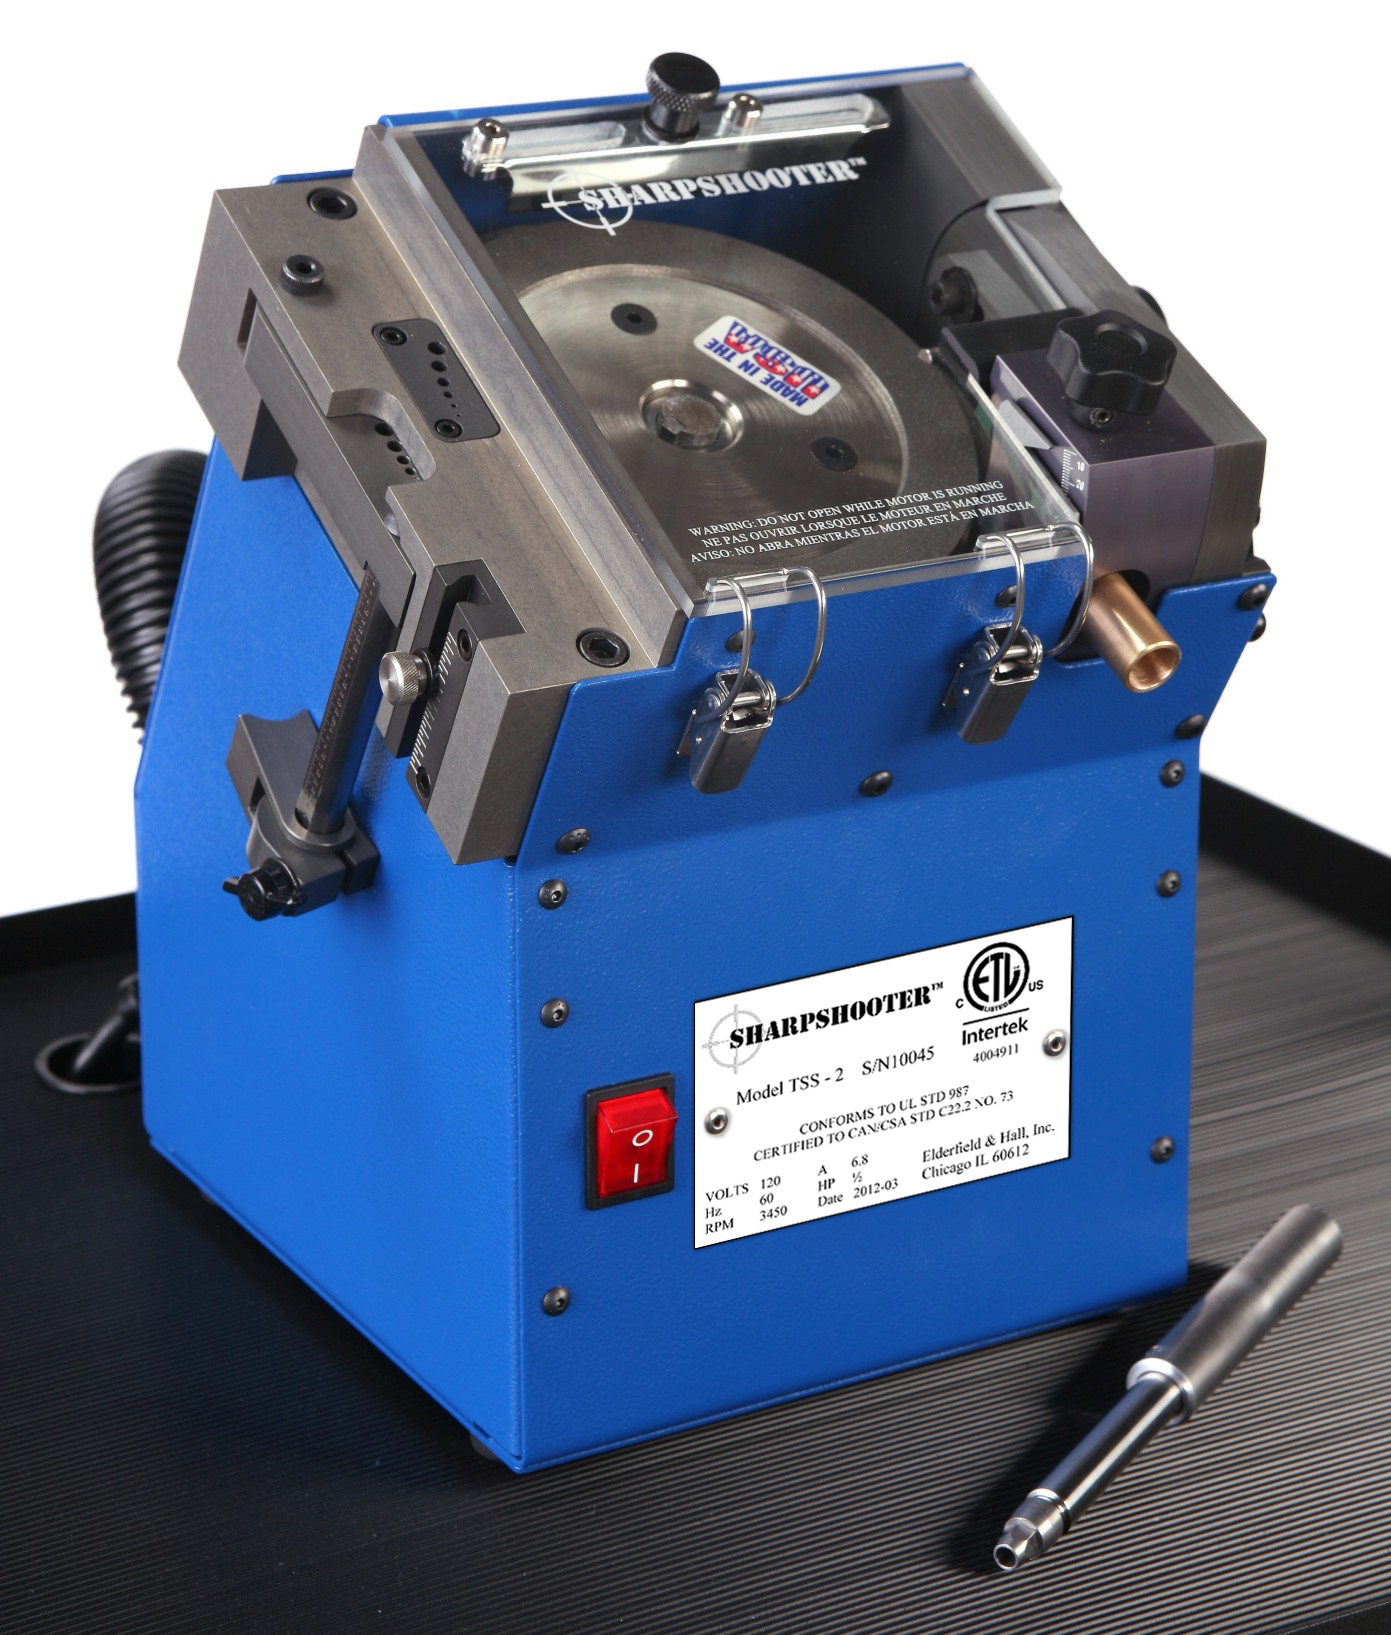 Pro-Fusion: The Sharpshooter Precision Tungsten Electrode Grinder